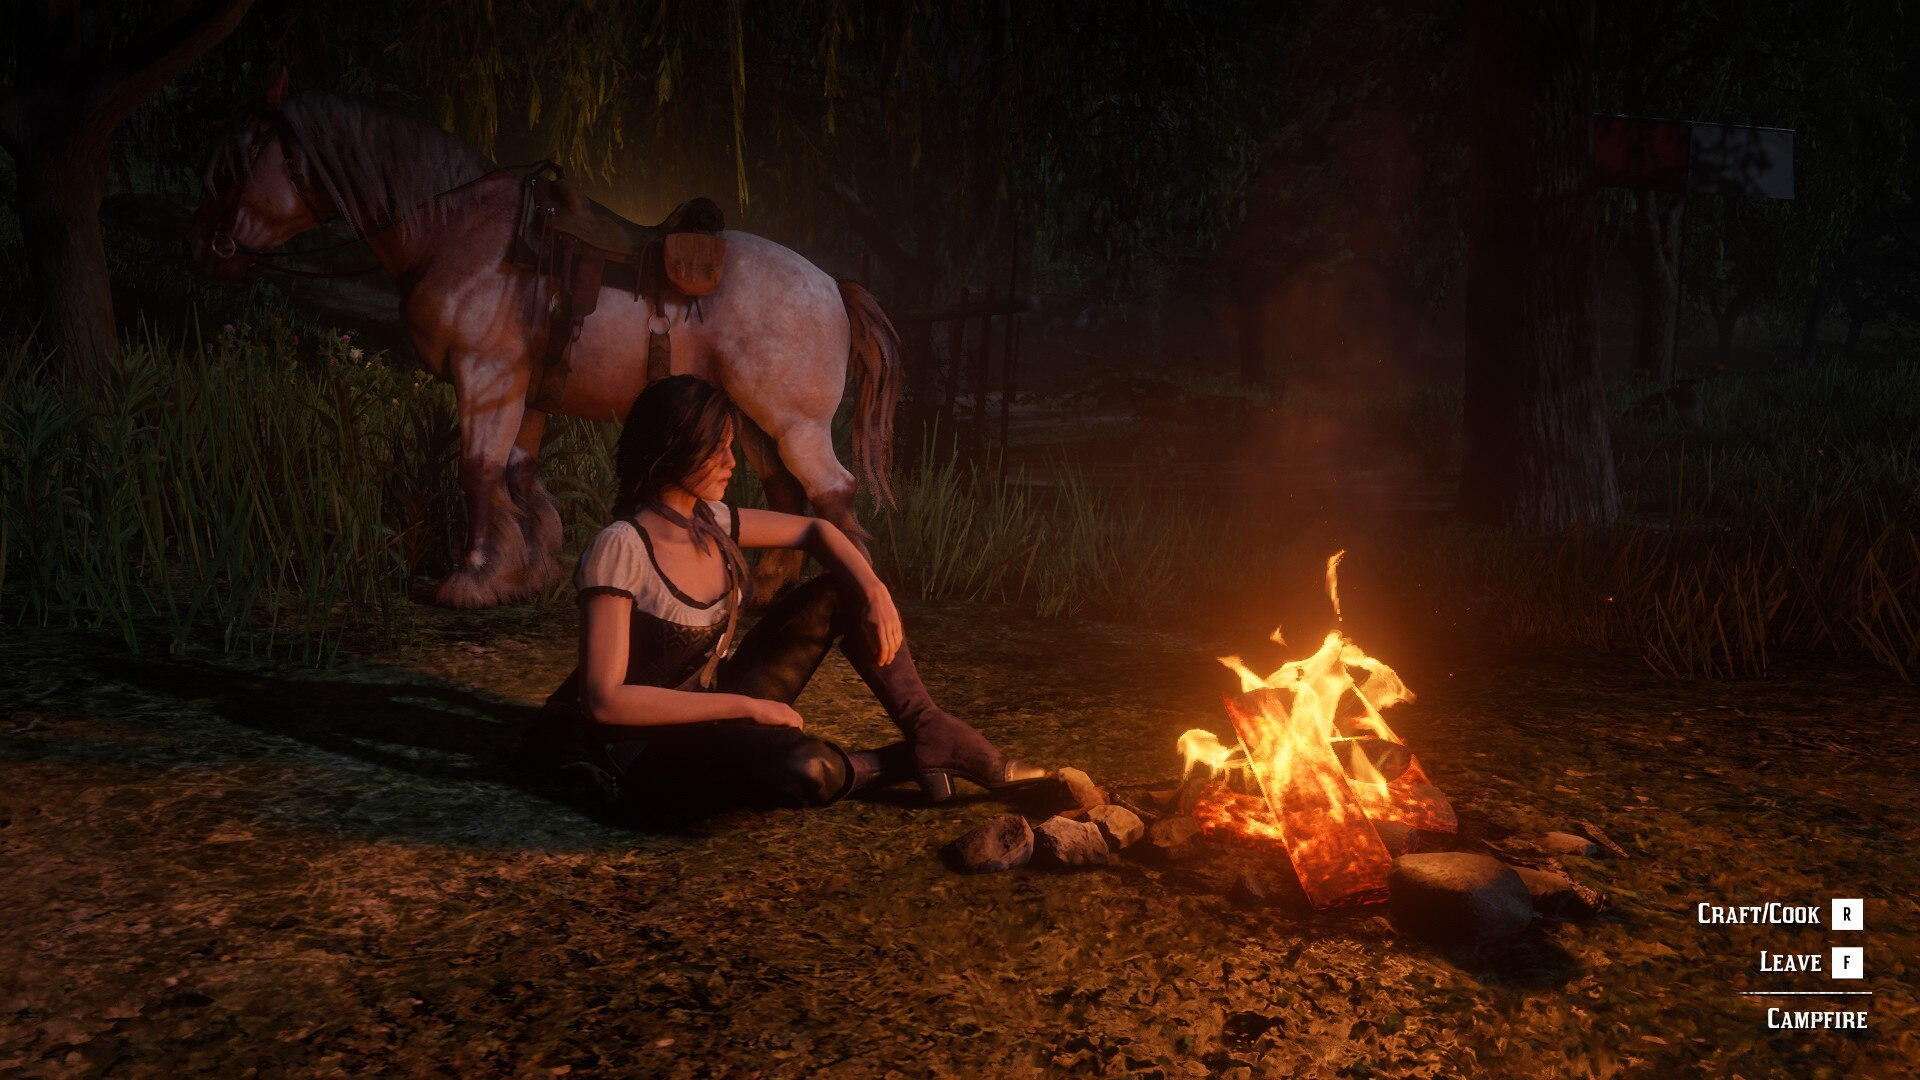 Video game screenshot of a cowgirl sitting at a campfire at night, her horse standing nearby